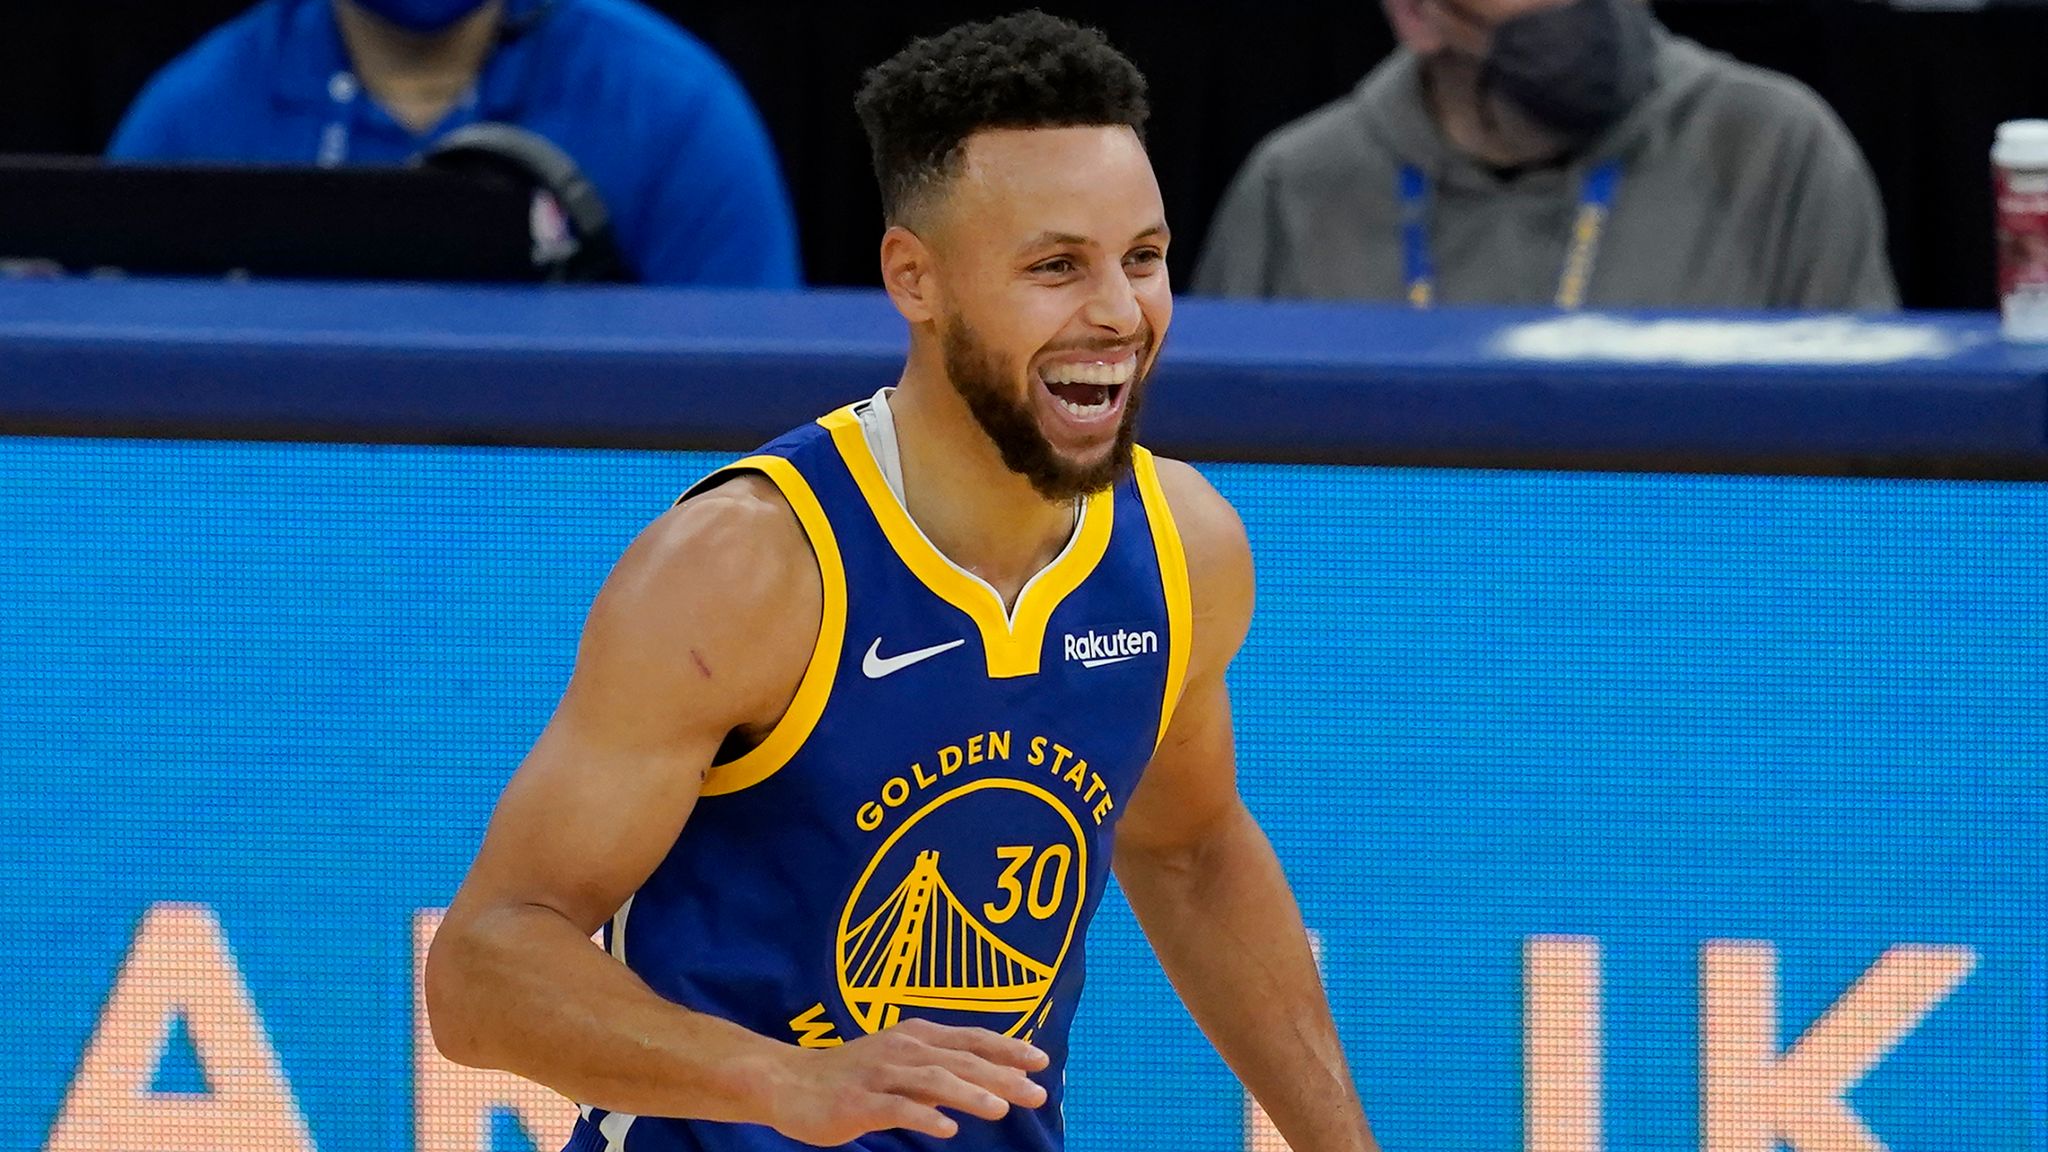 Nba Steph Curry Leads Golden State Warriors Rout Of Cleveland Cavaliers Utah Jazz Beat Philadelphia 76ers Nba News Sky Sports